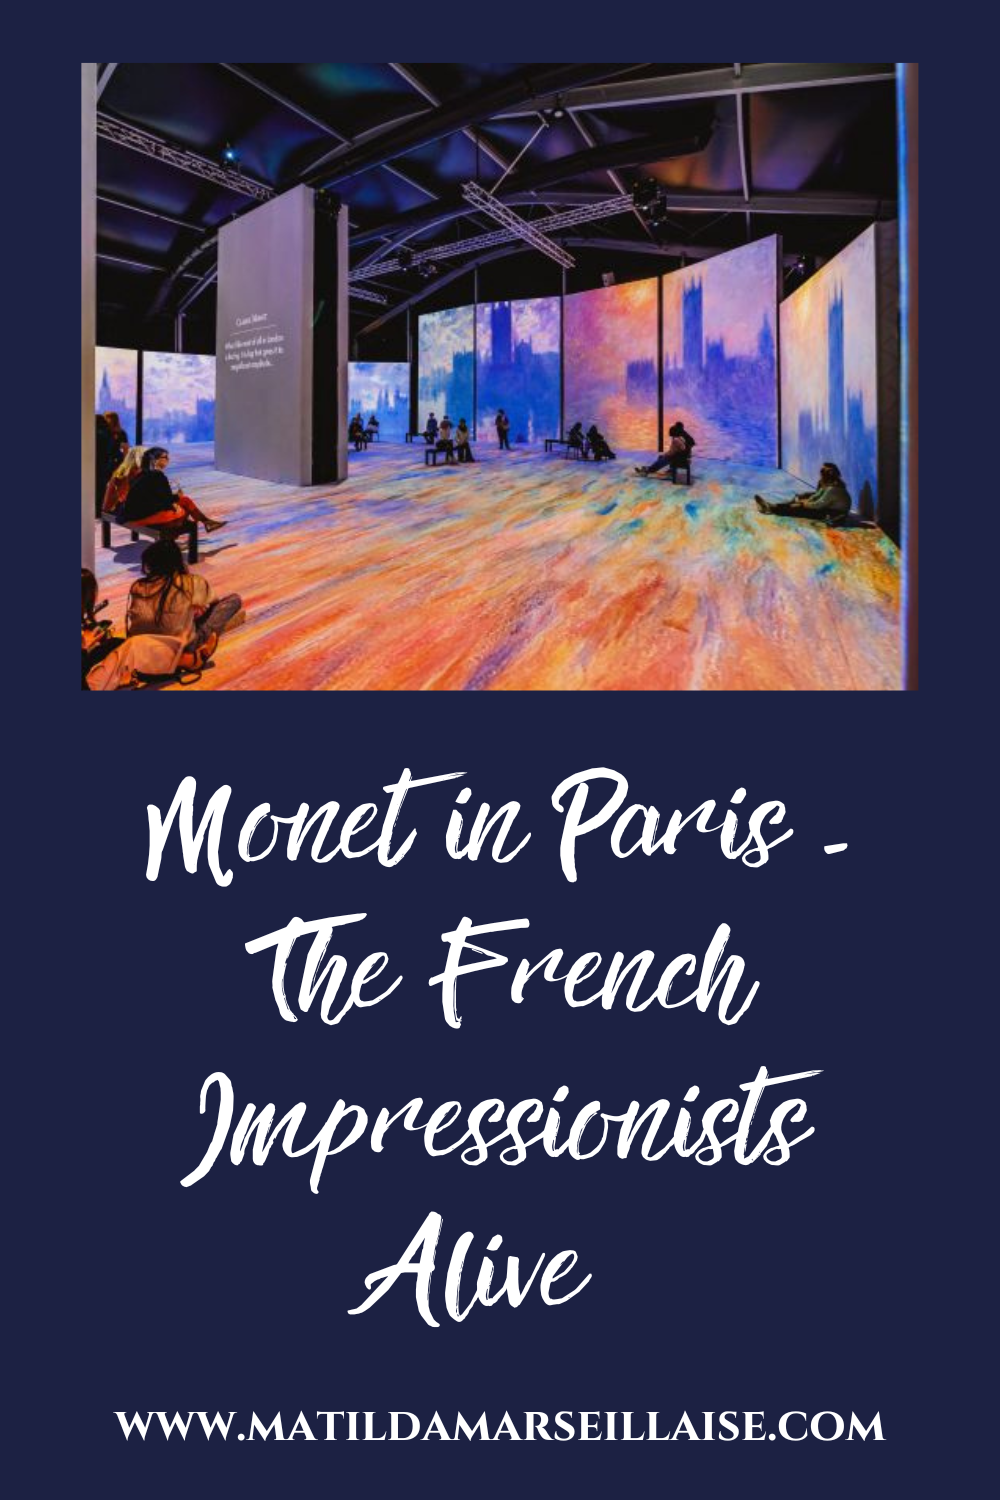 Monet in Paris brings the most iconic impressionist paintings to Brisbane